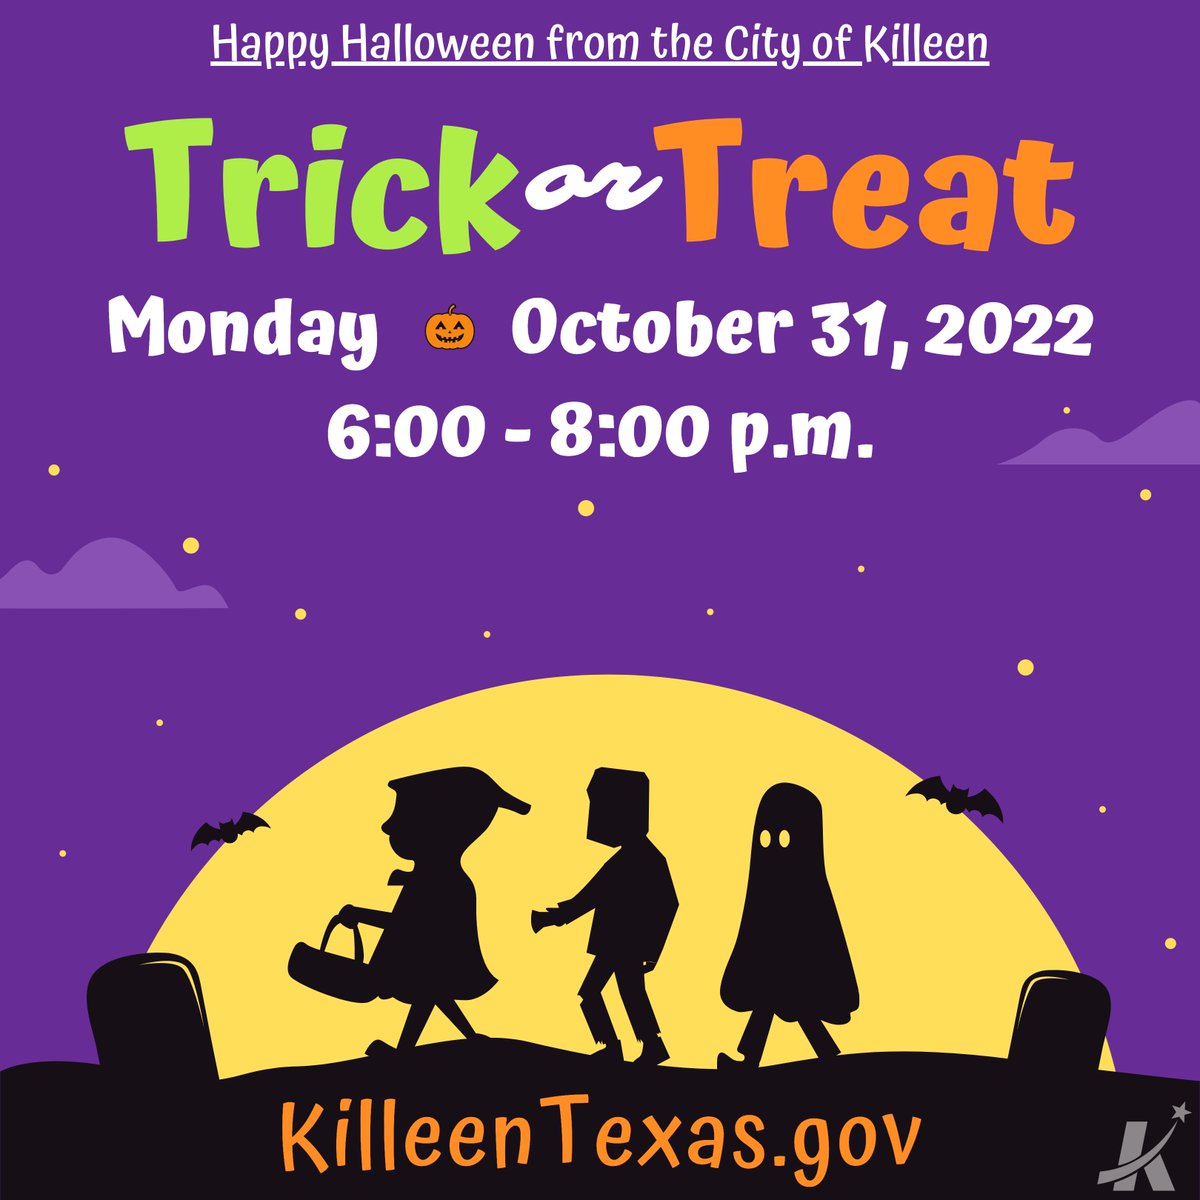 👻👻👻 HAPPY HALLOWEEN 👻👻👻 The City of Killeen recommends door to door Trick or Treating be done tonight from 6-8p.m. But be aware, some children may be out sooner or even later, so please be careful out there driving through our neighborhoods,